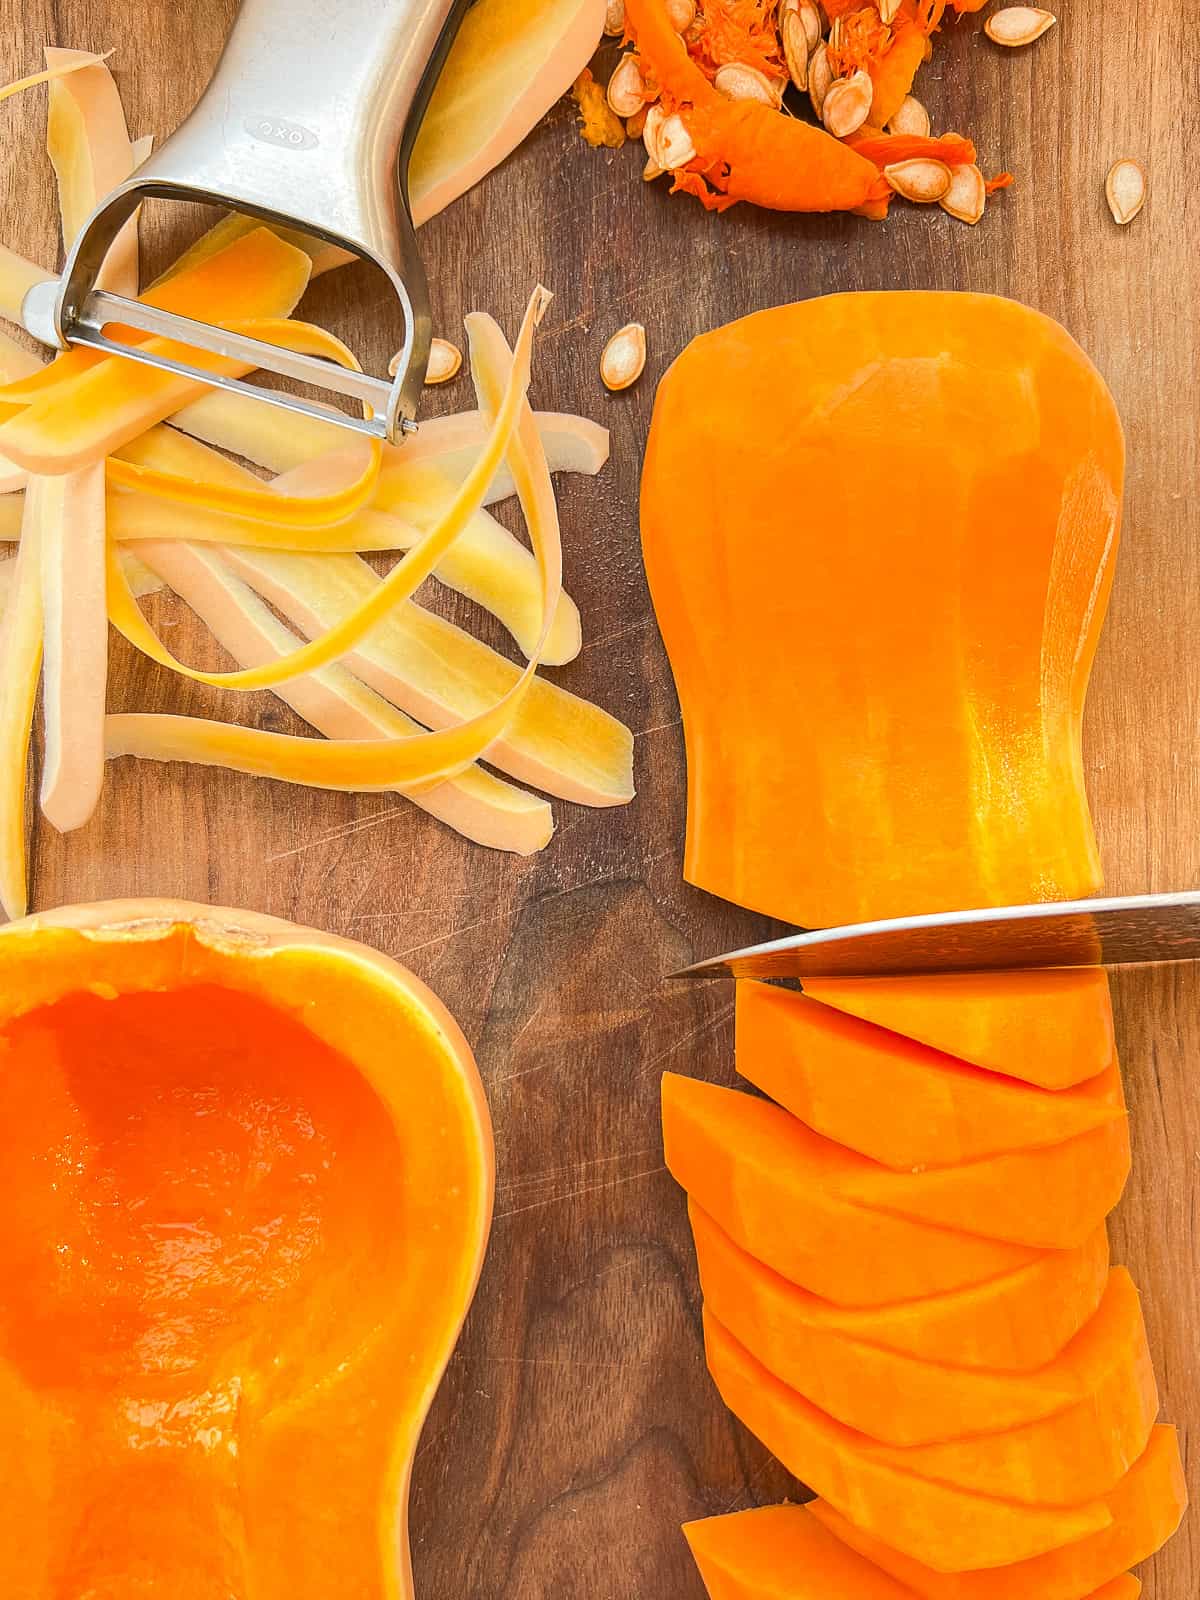 An image of peeled, seeded, and sliced butternut squash.